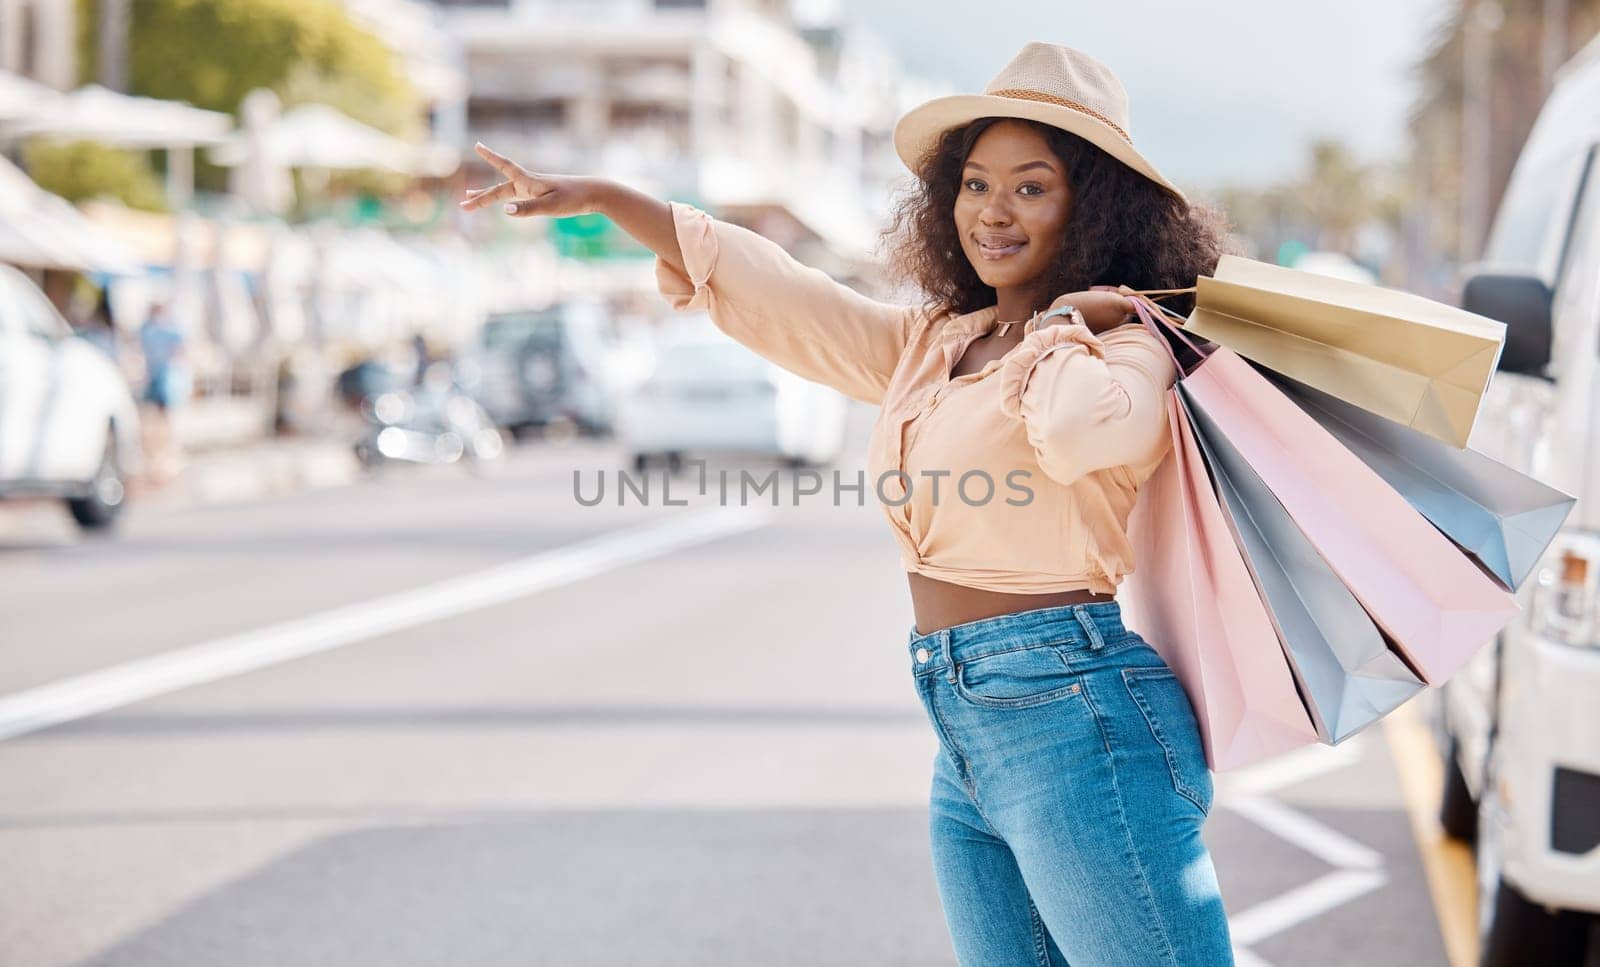 Retail, shopping and taxi with black woman in city for travel, luxury and fashion in urban street. Happy, sales and gift with customer and discount bag in road to call cab transportation service.